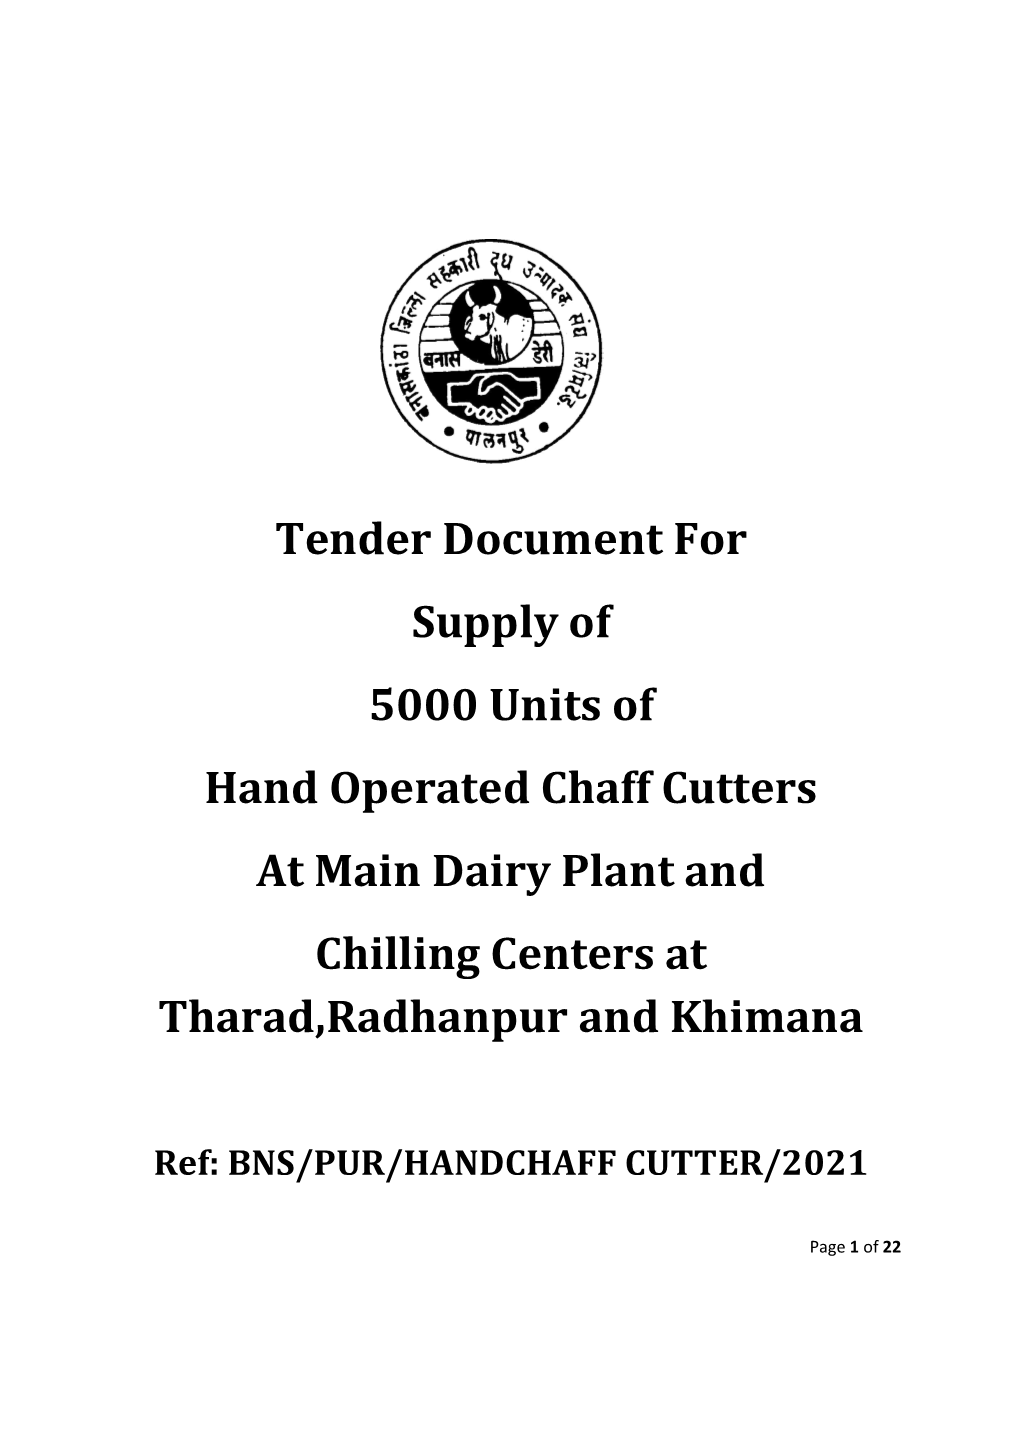 Tender Docume Hand Operated Ch at Main Dairy Pl